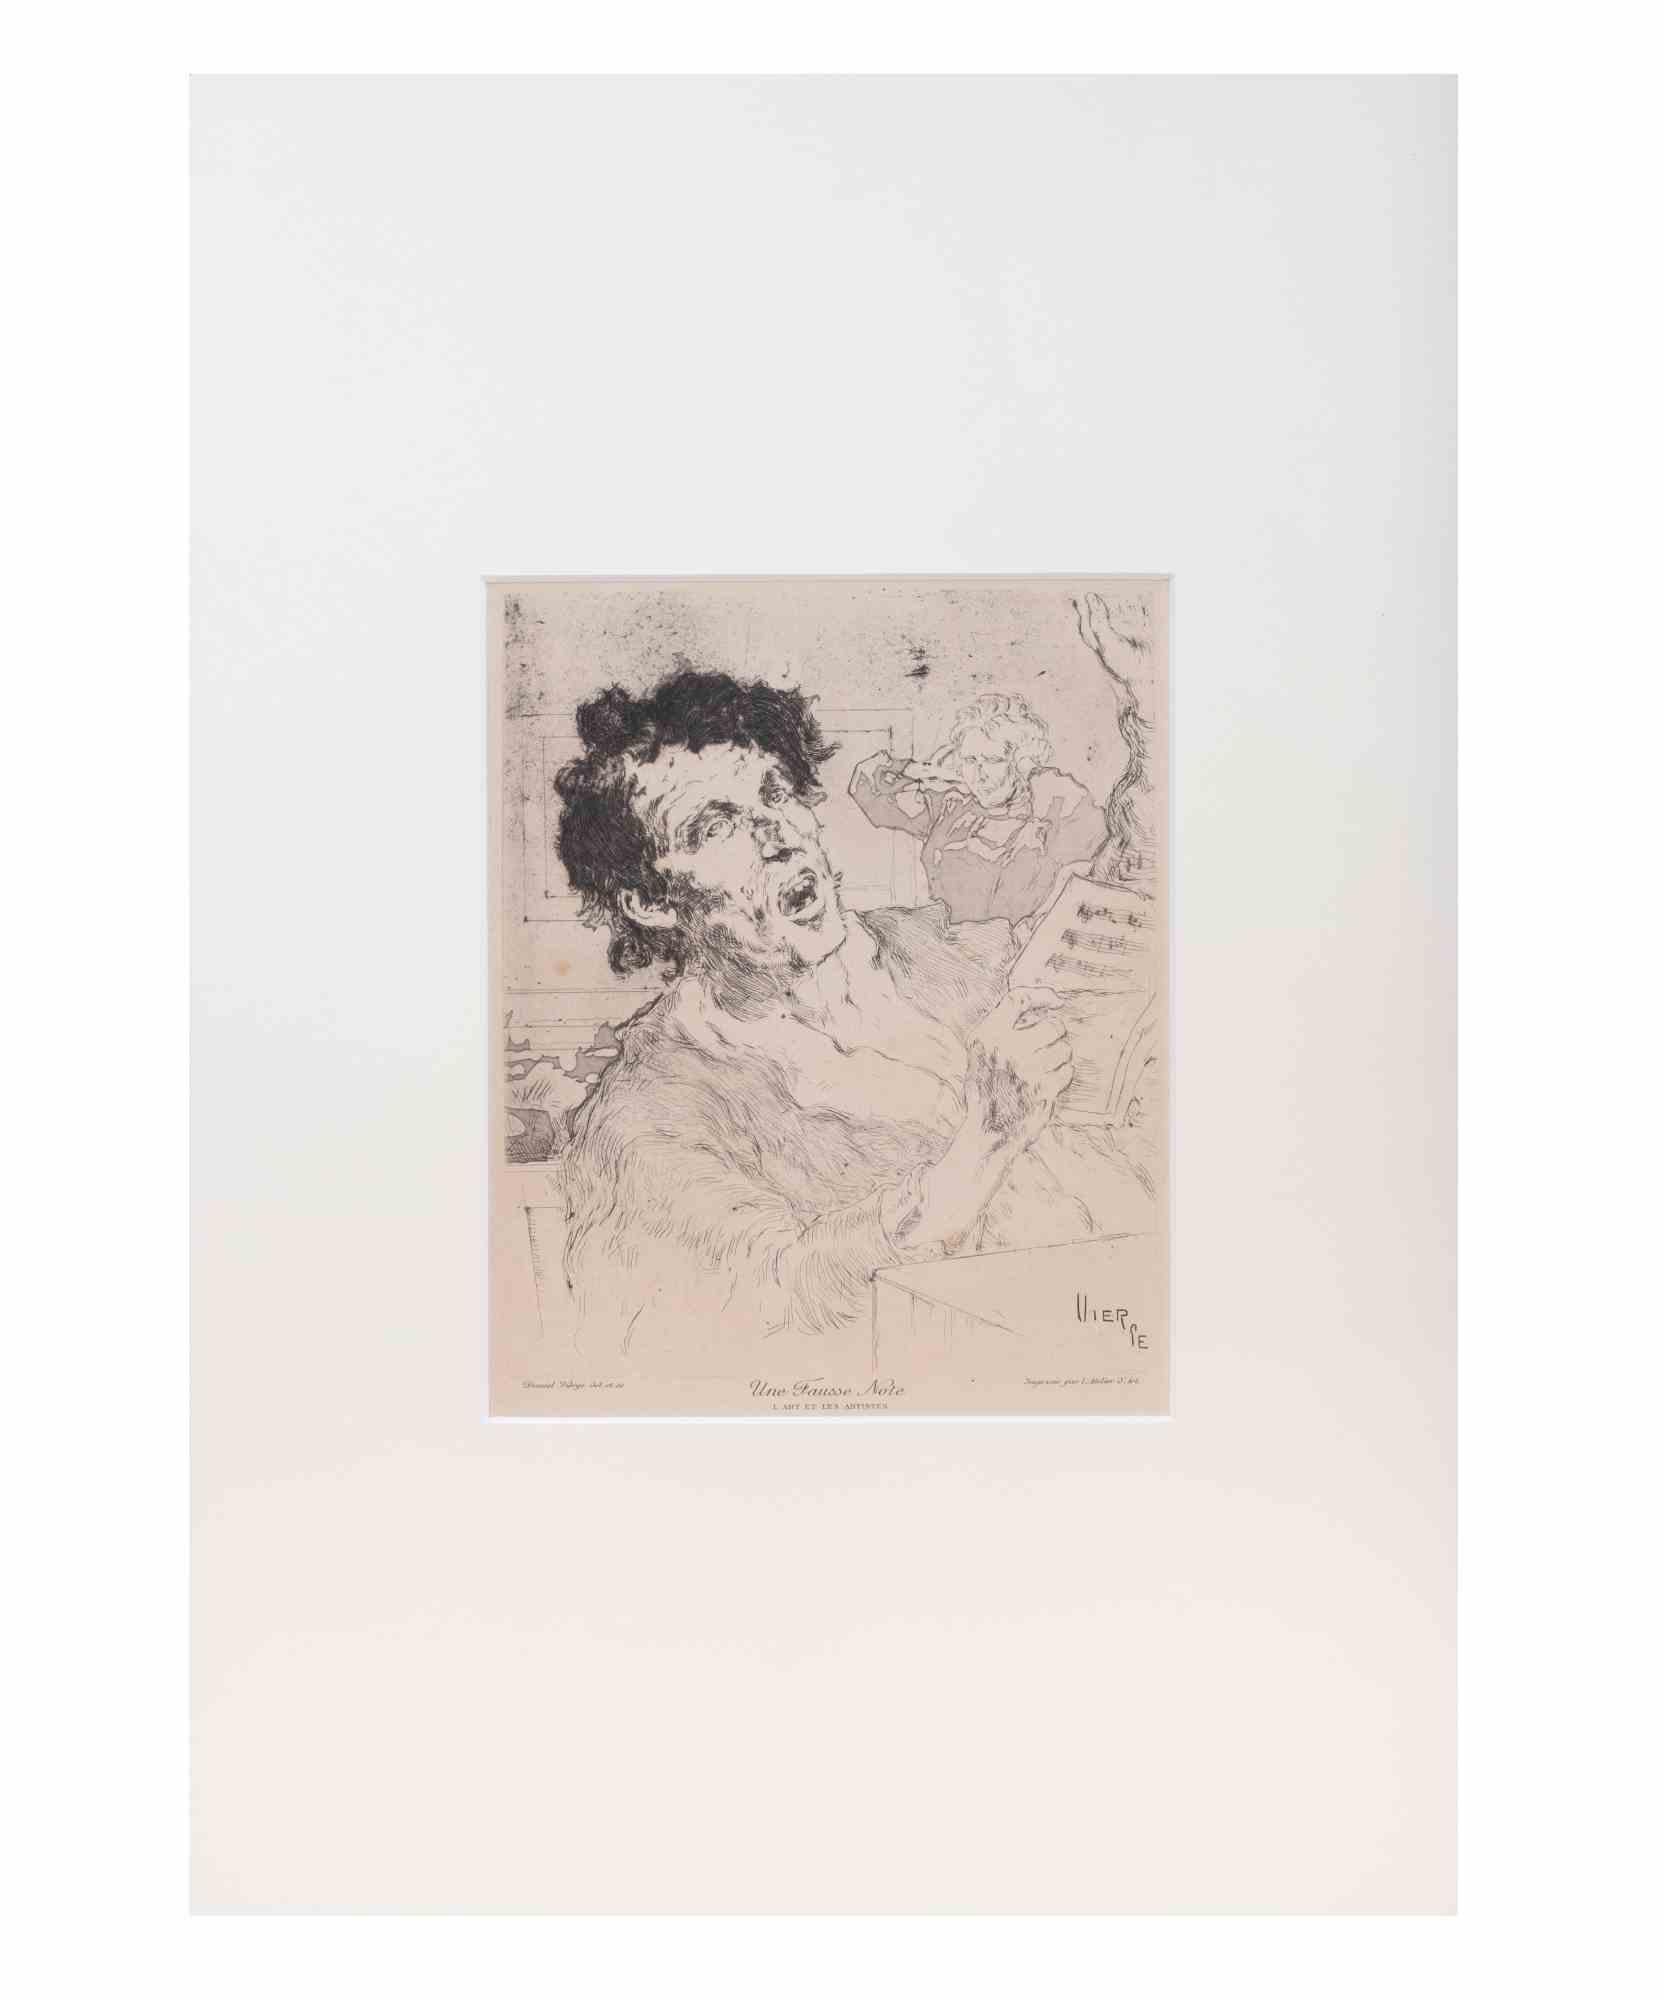 Une Fausse Note is a modern artwork realized by Daniel Vierge in the late 19th Century

Balck and white etching. Signed in the plate.

The artwork is from the magazine "L'Art et les Artistes".

Passepartout included. Good conditions.